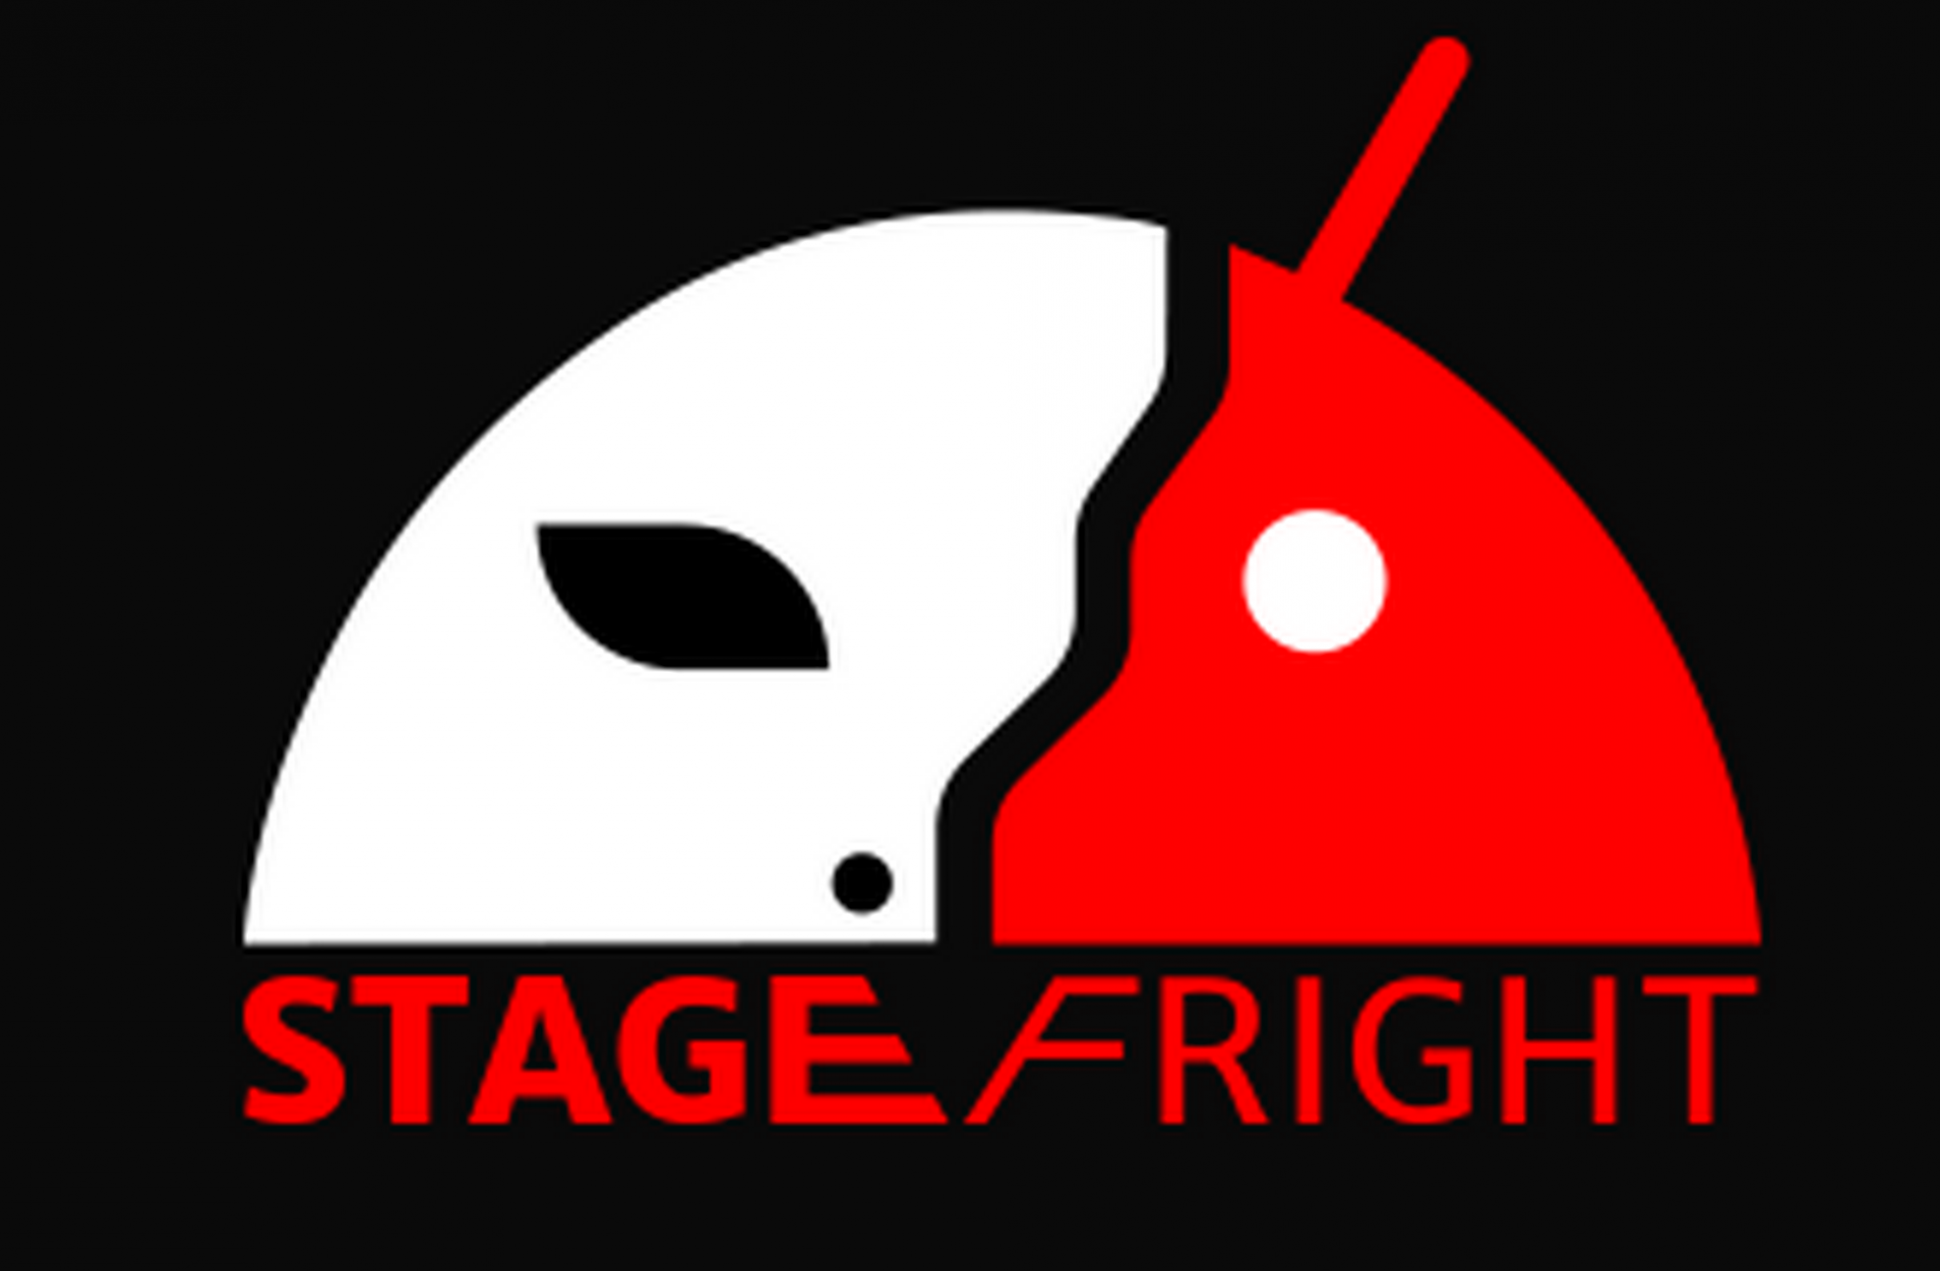 Android Stagefright Vulnerability